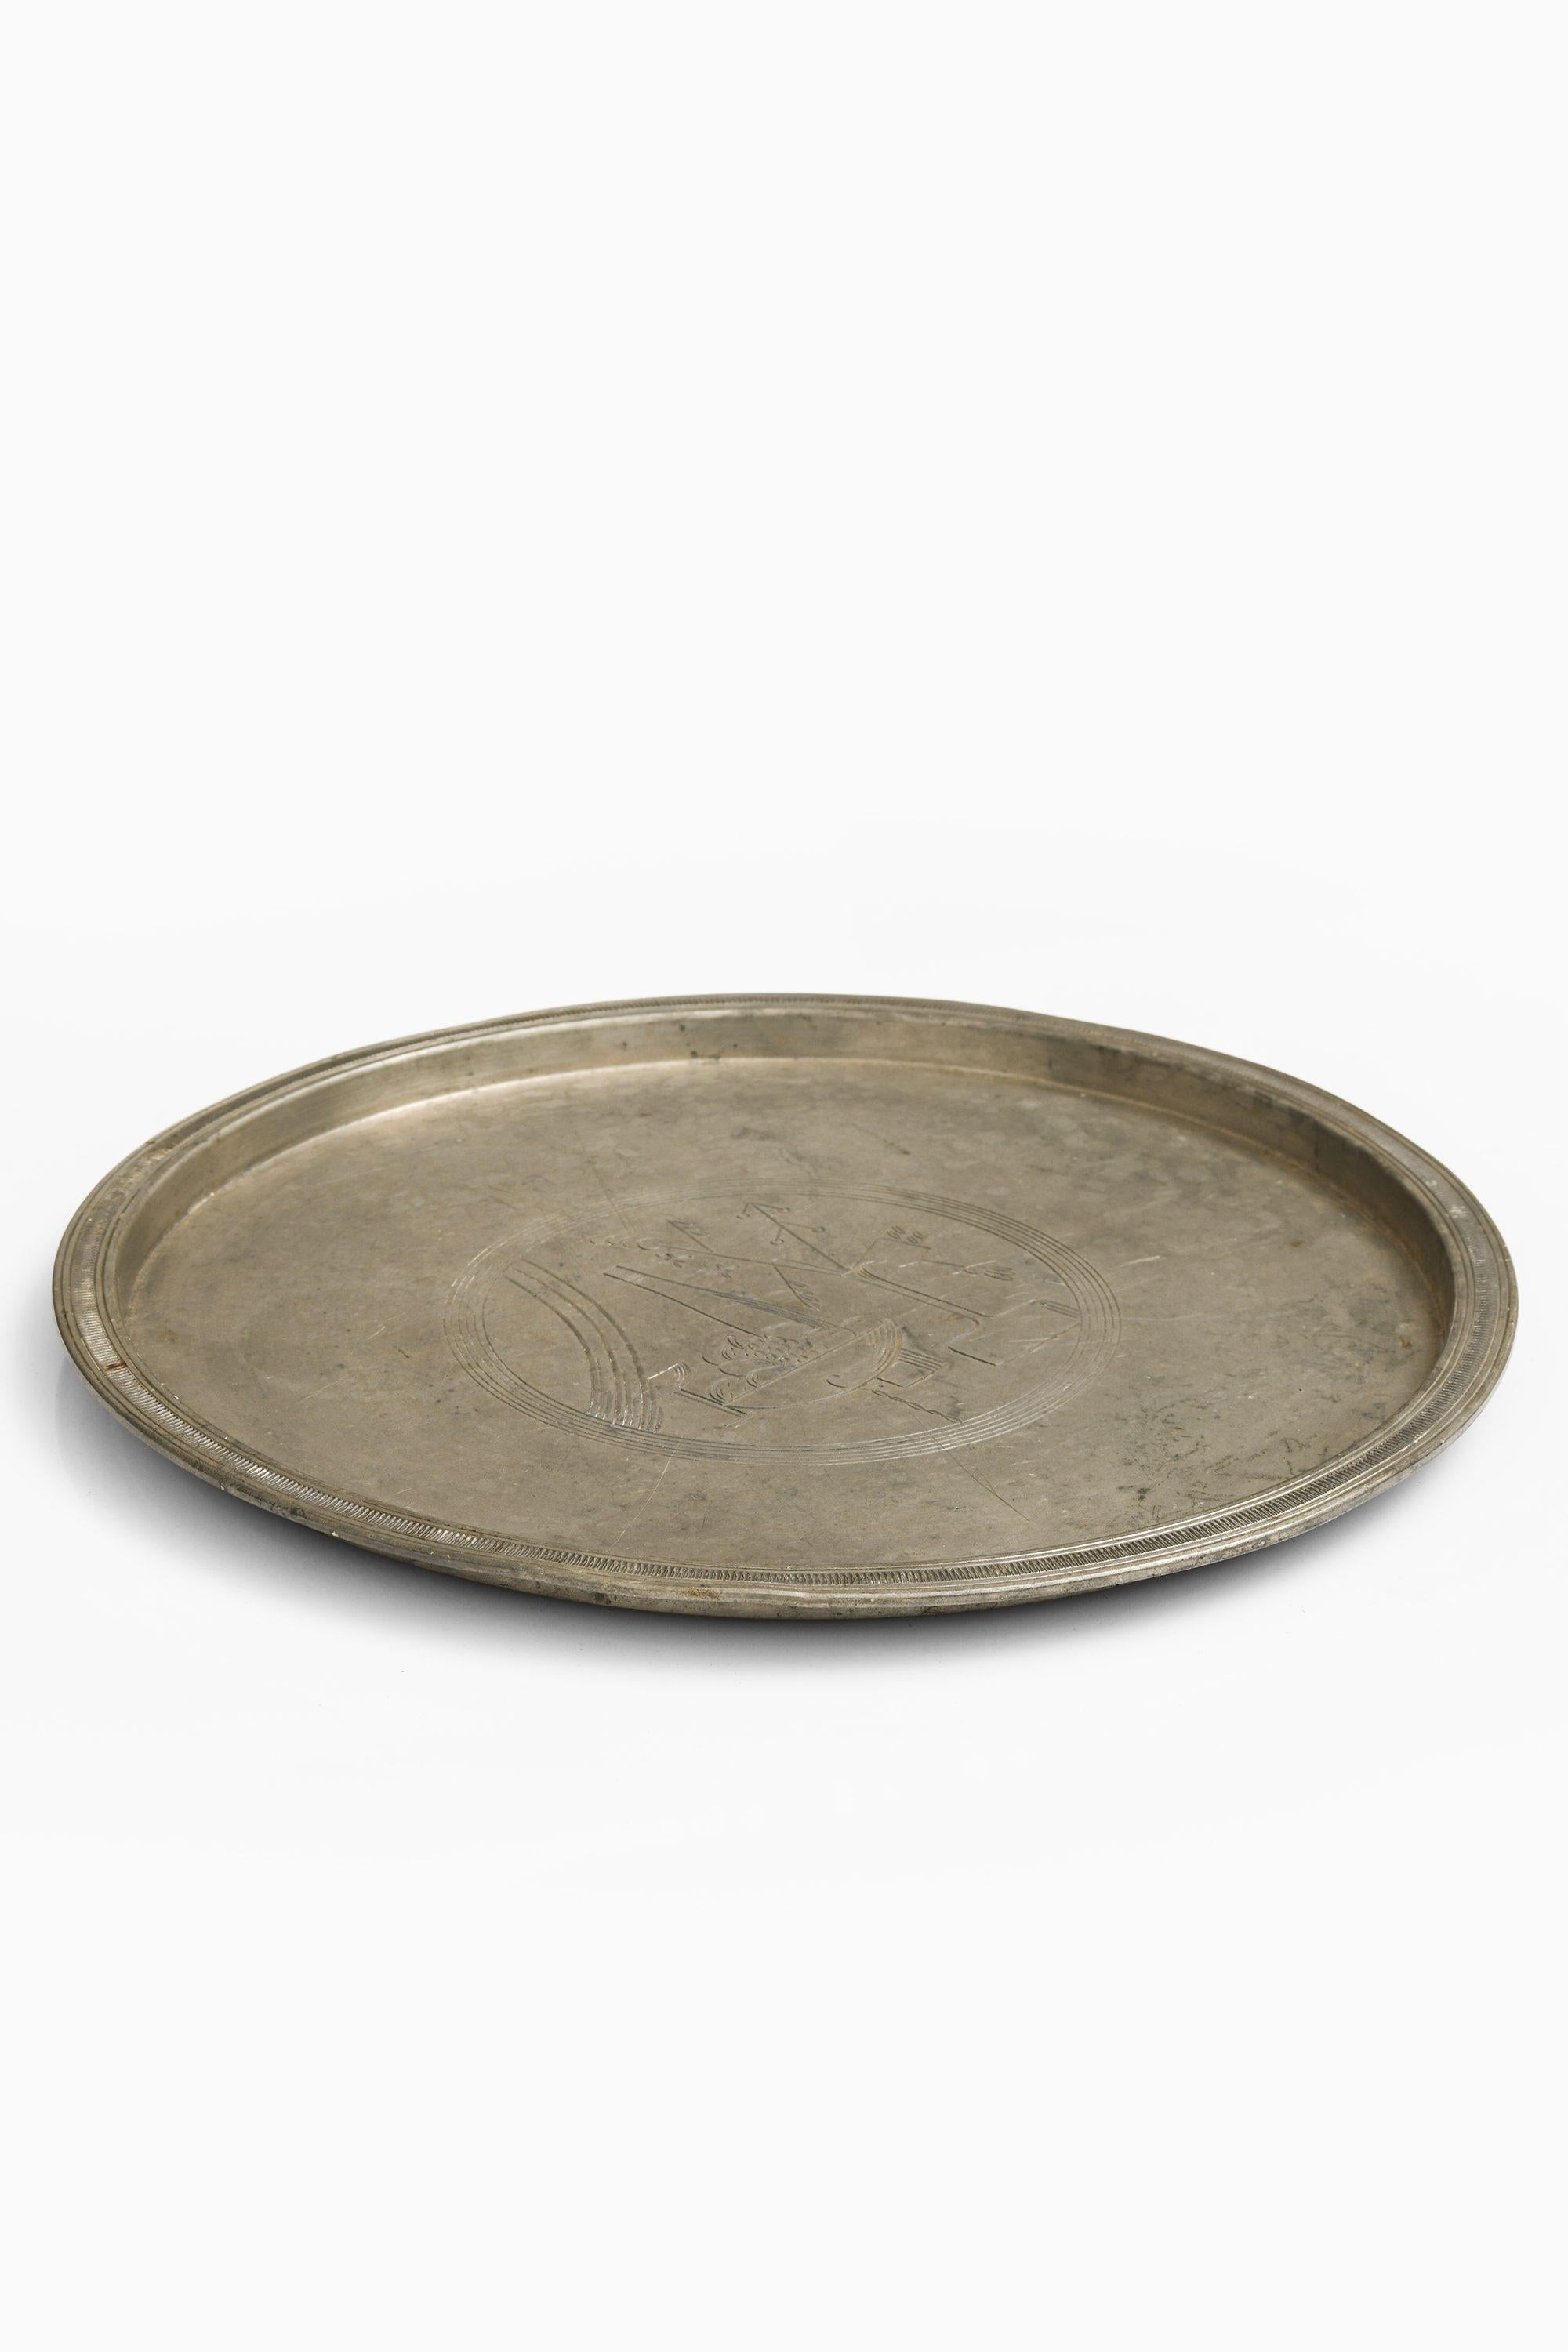 Rare Serving Tray in Pewter by Sylvia Stave, 1934

Additional Information:
Material: Pewter
Style: Mid century, Scandinavian
Produced by C.G. Hallberg in Sweden
Dimensions (W x D x H): 29 x 29 x 1.5 cm
Condition: Good vintage condition, with signs